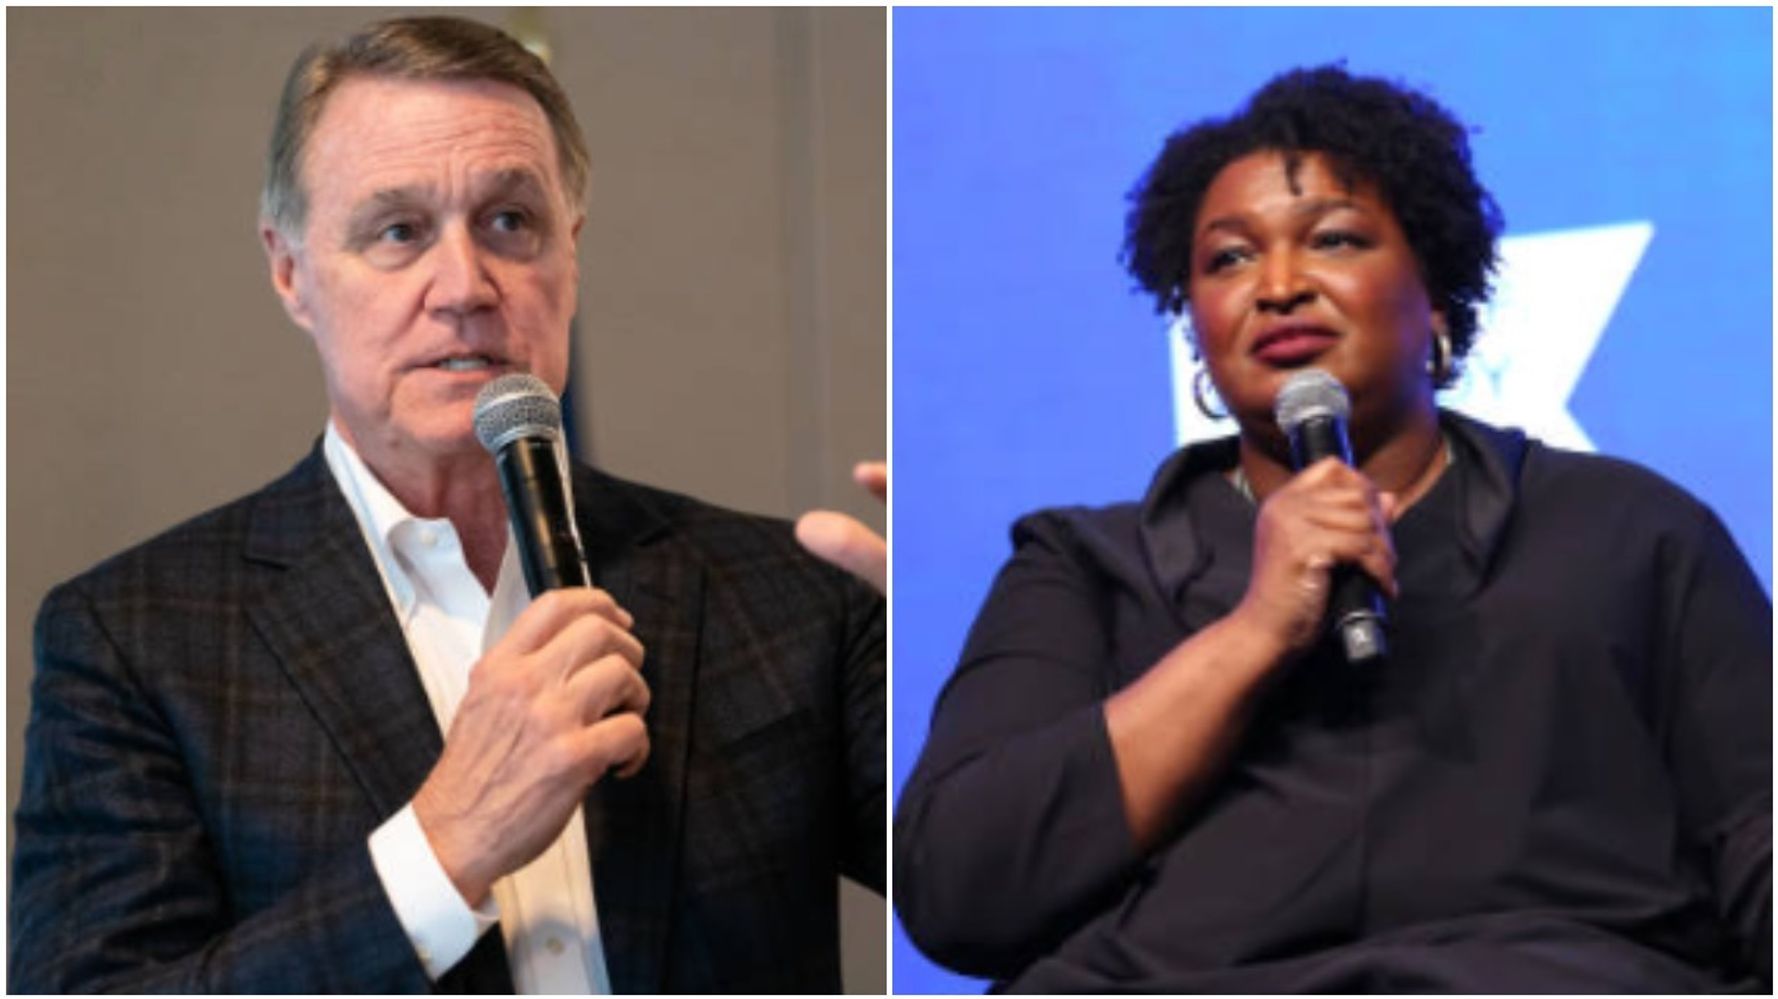 David Perdue Attacks Stacey Abrams As 'Demeaning Her Own Race' In Racist Remarks